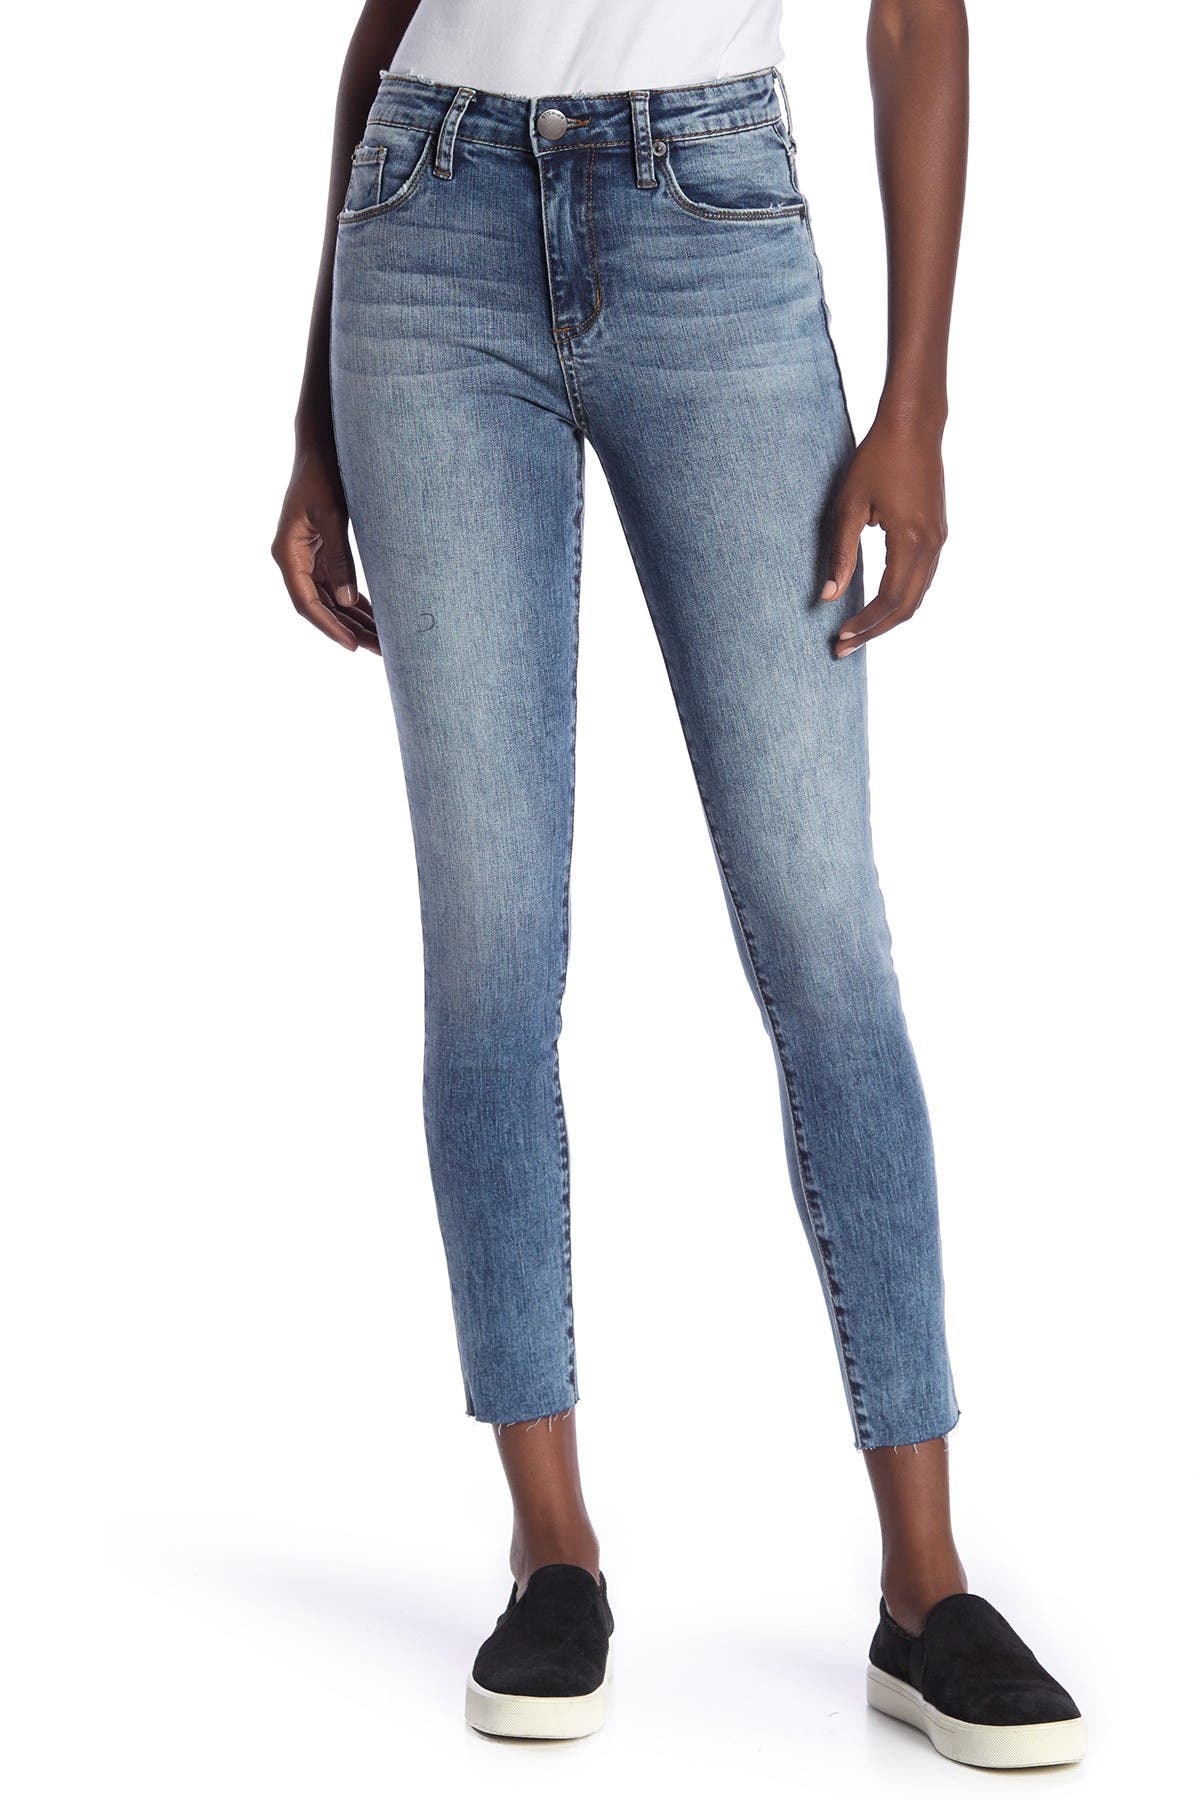 nordstrom rack high waisted jeans